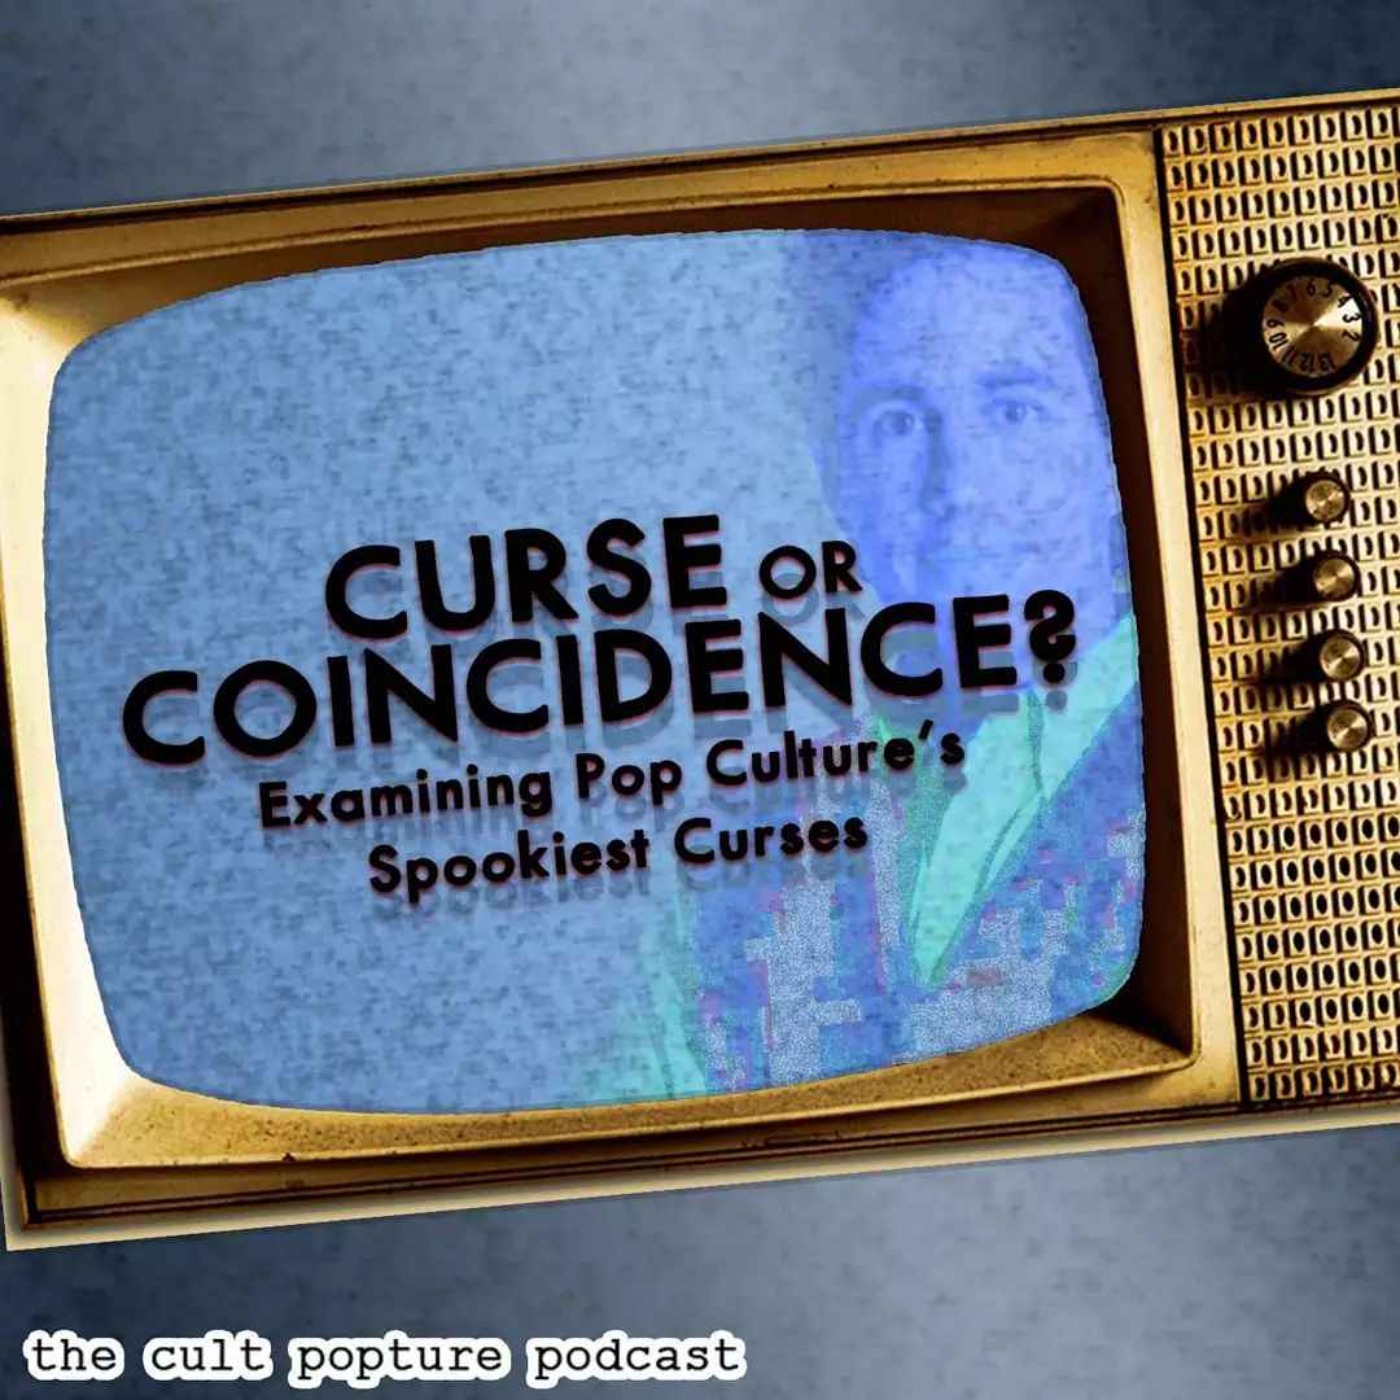 Curse or Coincidence? Examining Pop Culture's Spookiest Curses | The Cult Popture Podcast